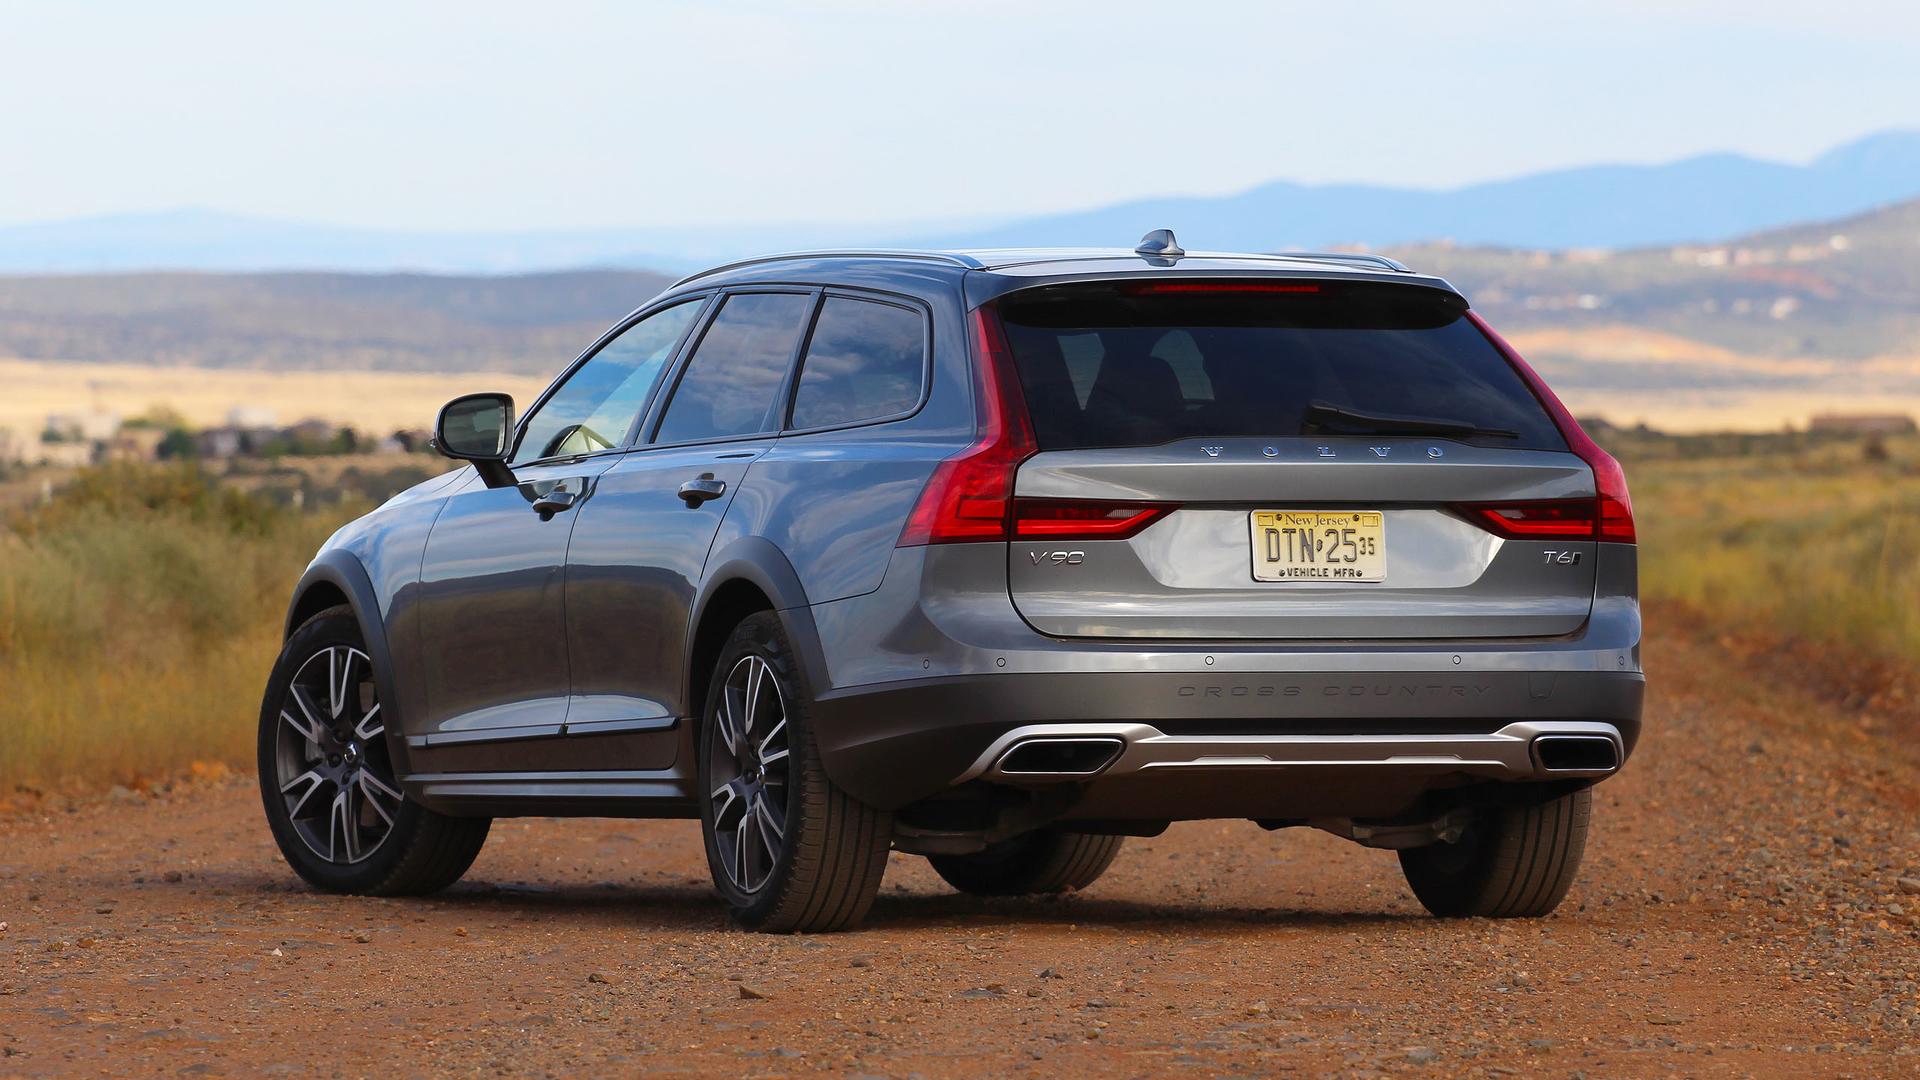 2017 Volvo V90 Cross Country Review: One For The Long Haul